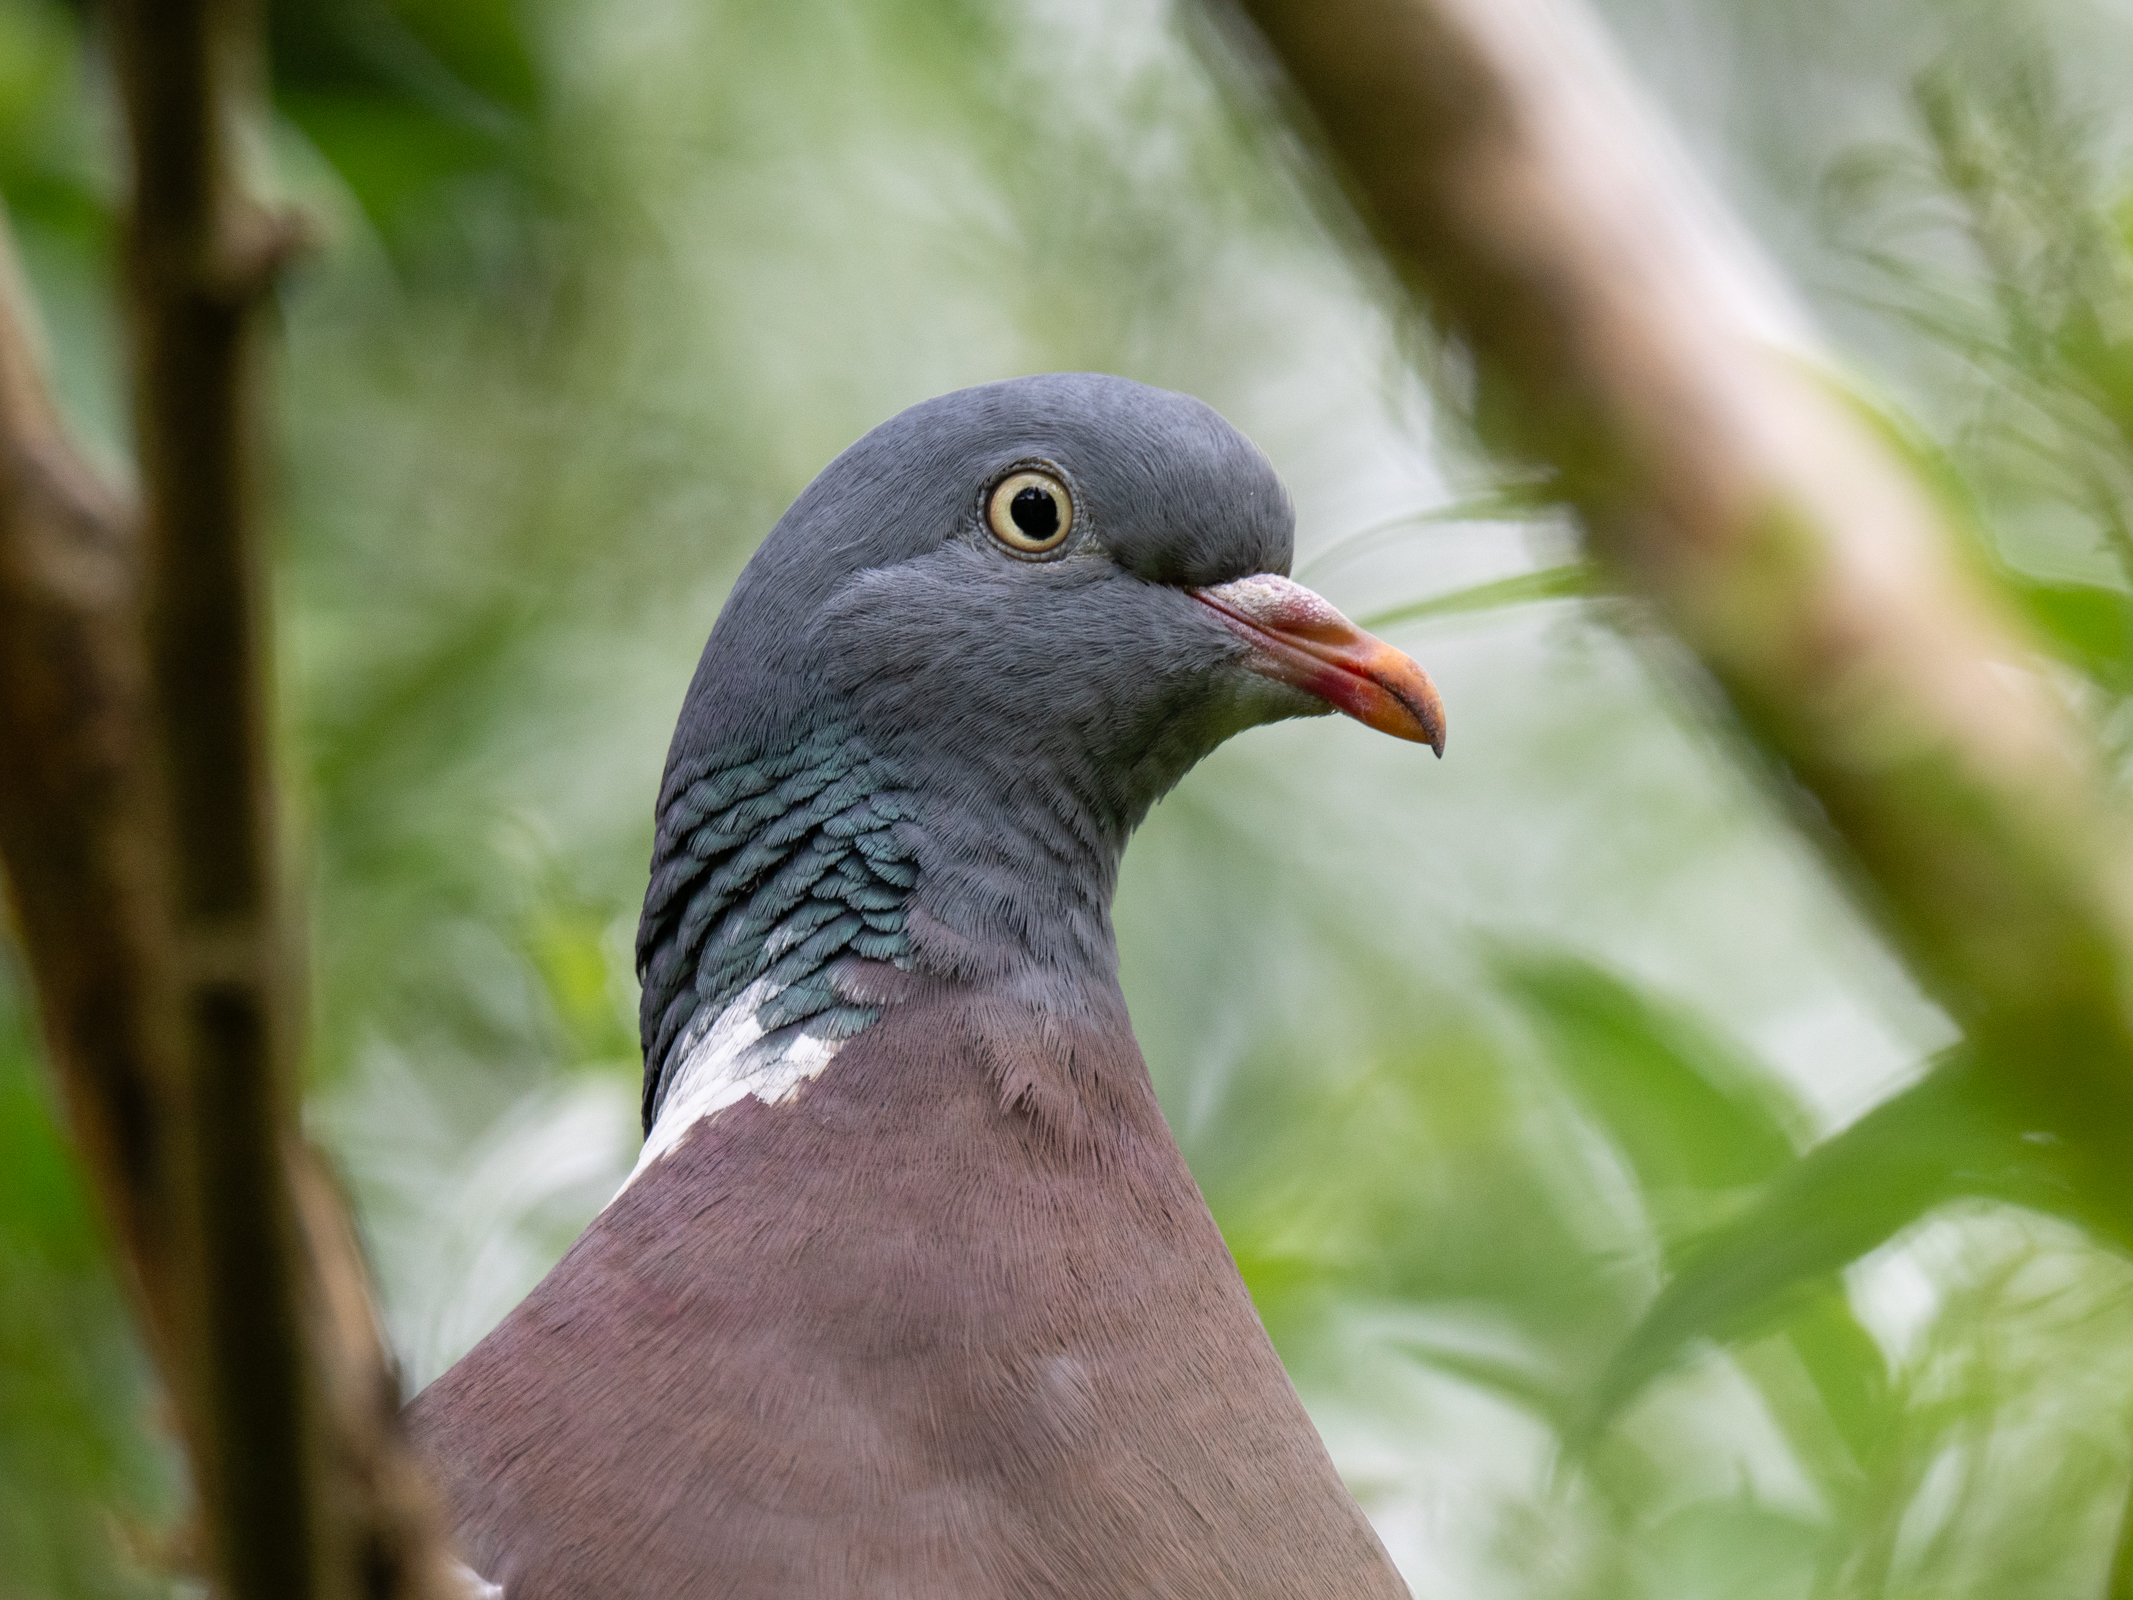 Photo of a pigeon taken with the OM System M.Zuiko Digital 150-600mm F5.0-6.3 IS